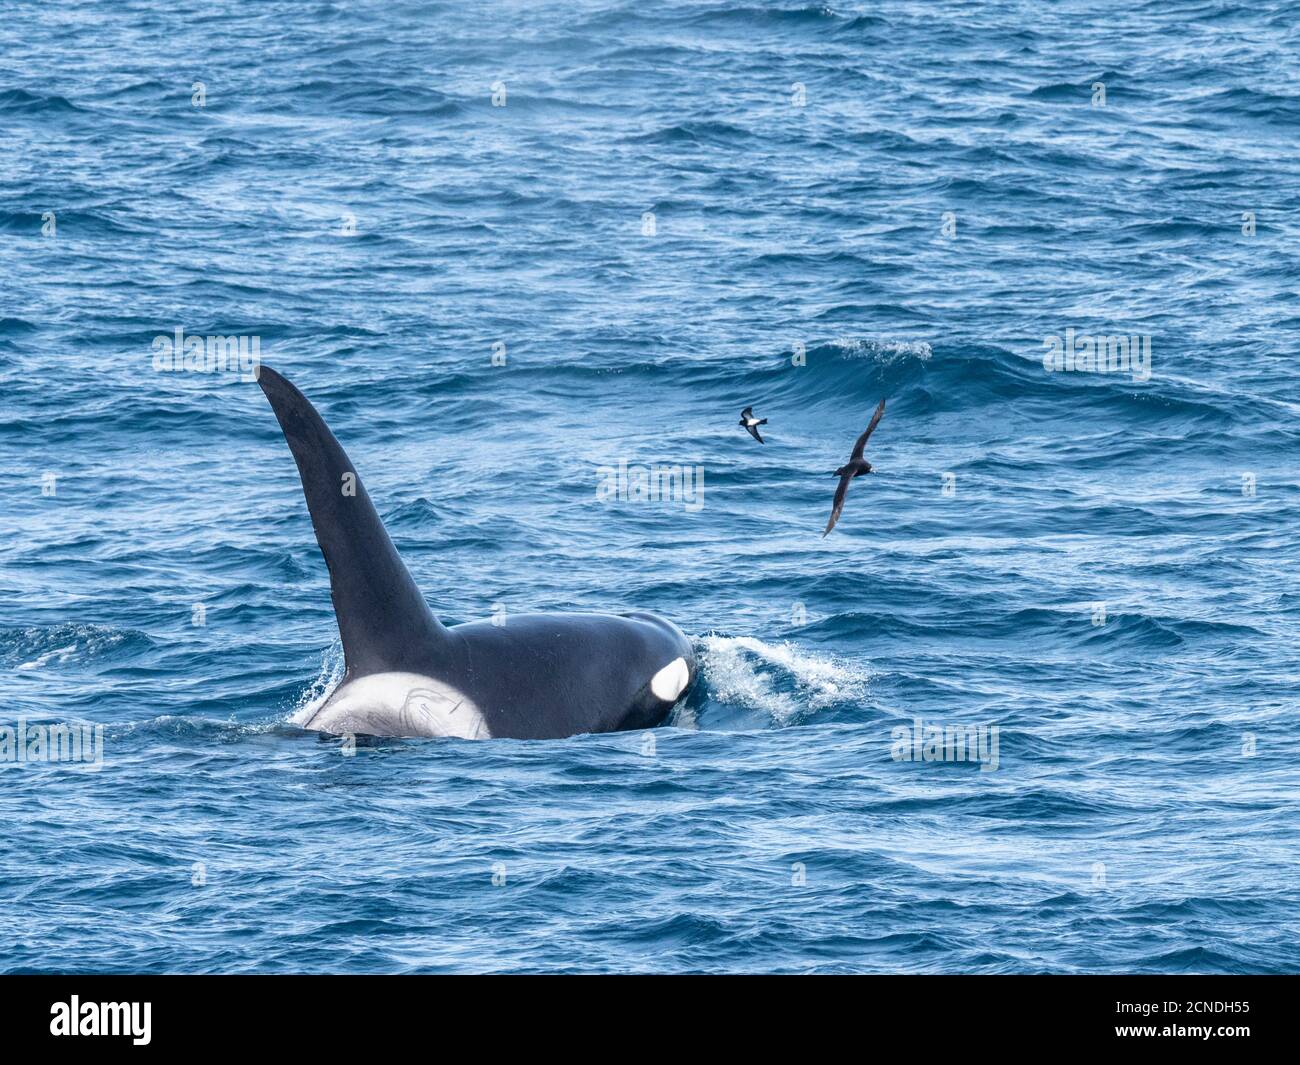 A pod of Type A killer whales (Orcinus orca), surfacing off the northwest coast of South Georgia, Polar Regions Stock Photo